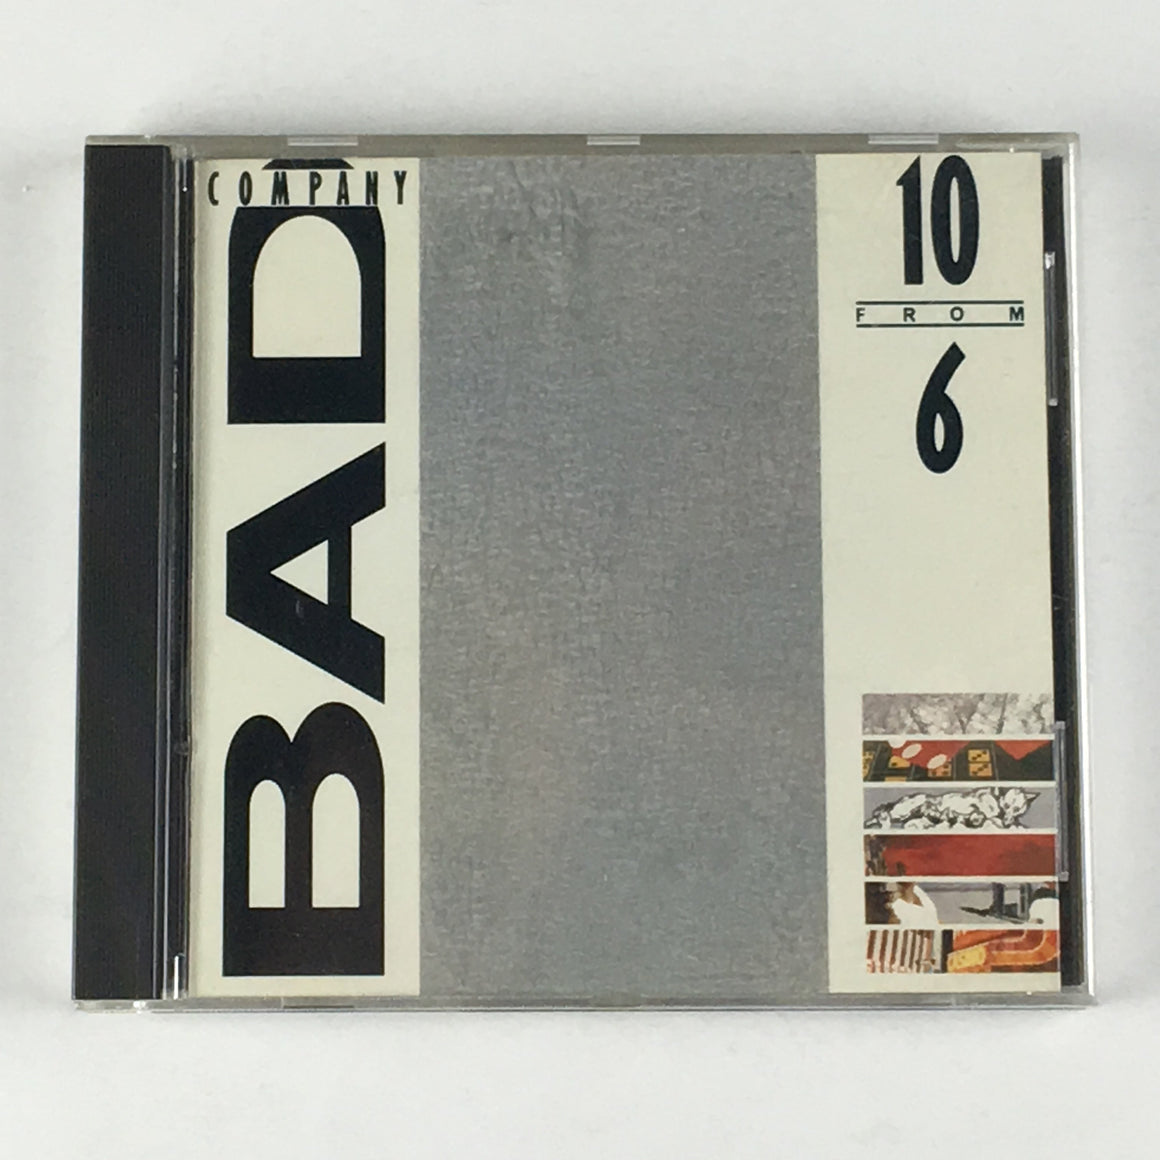 Bad Company ‎ 10 From 6 Used CD VG\VG